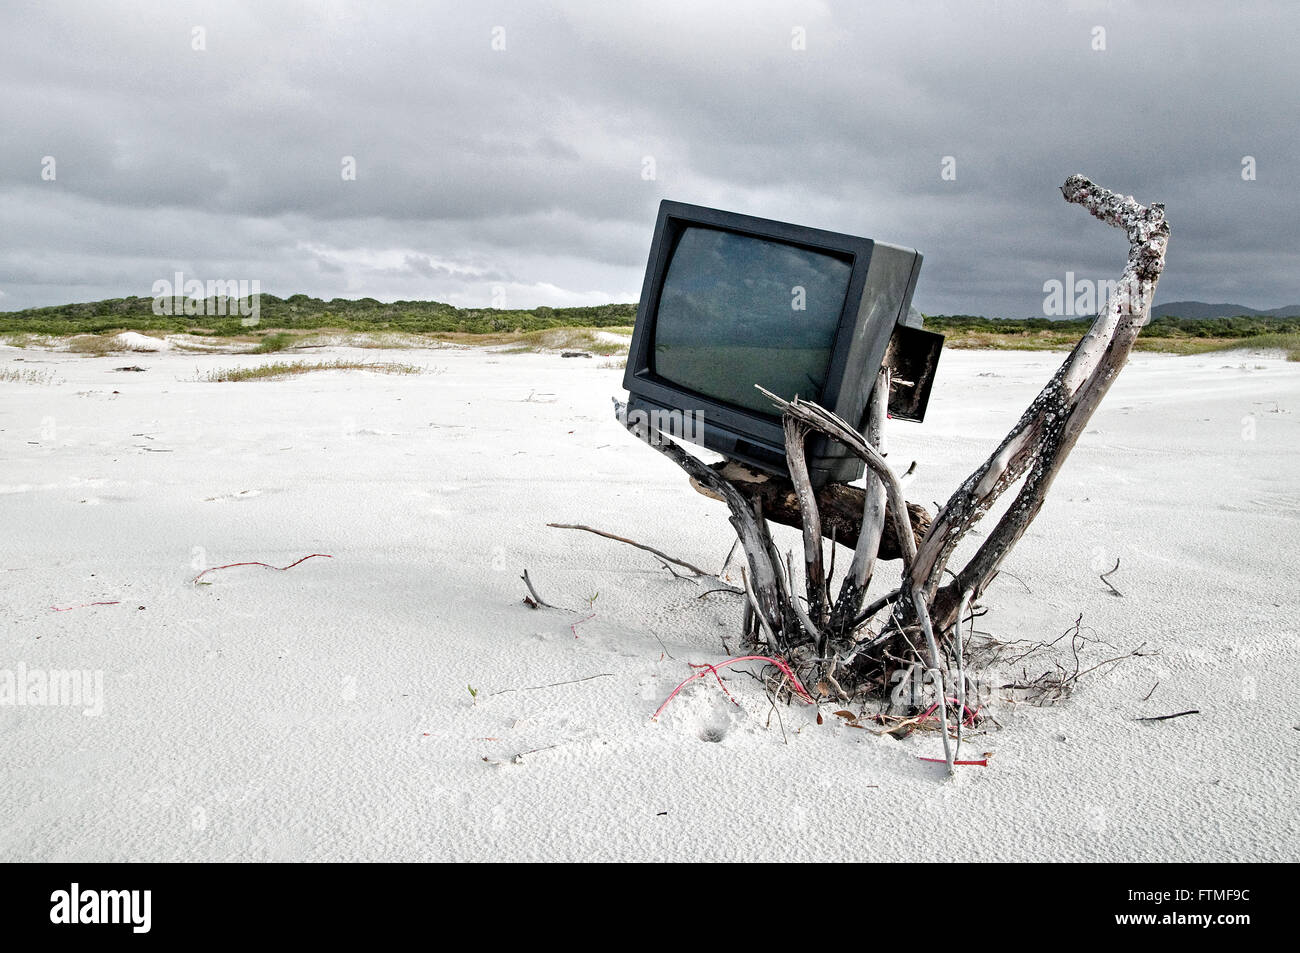 Carcass of television in Superagui Island beach area of environmental preservation Stock Photo